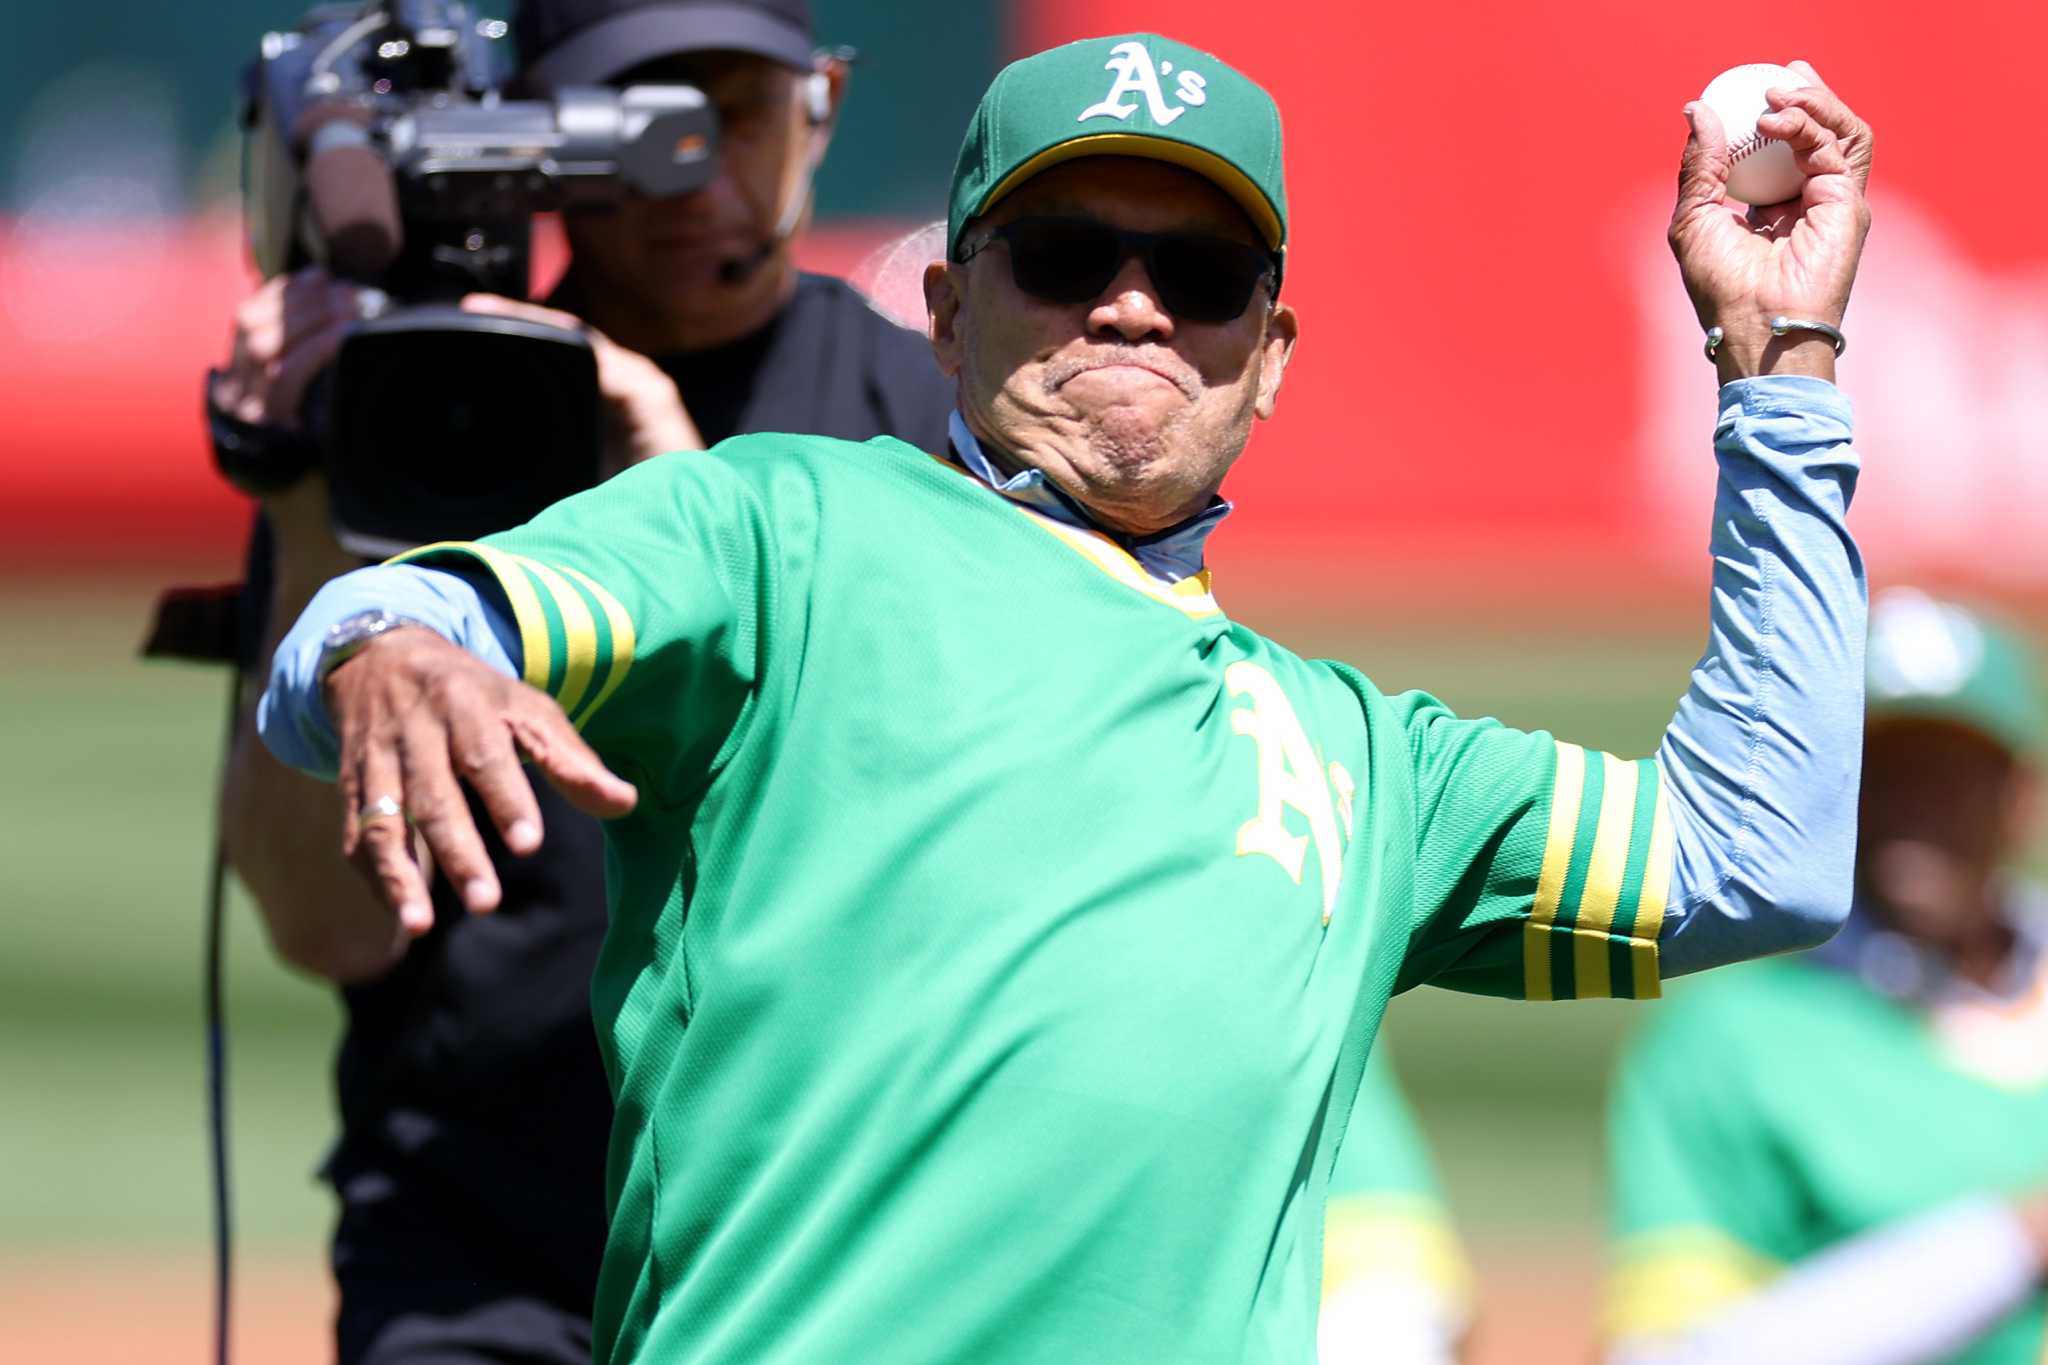 Reggie Jackson shares his doubts about A's future in Oakland